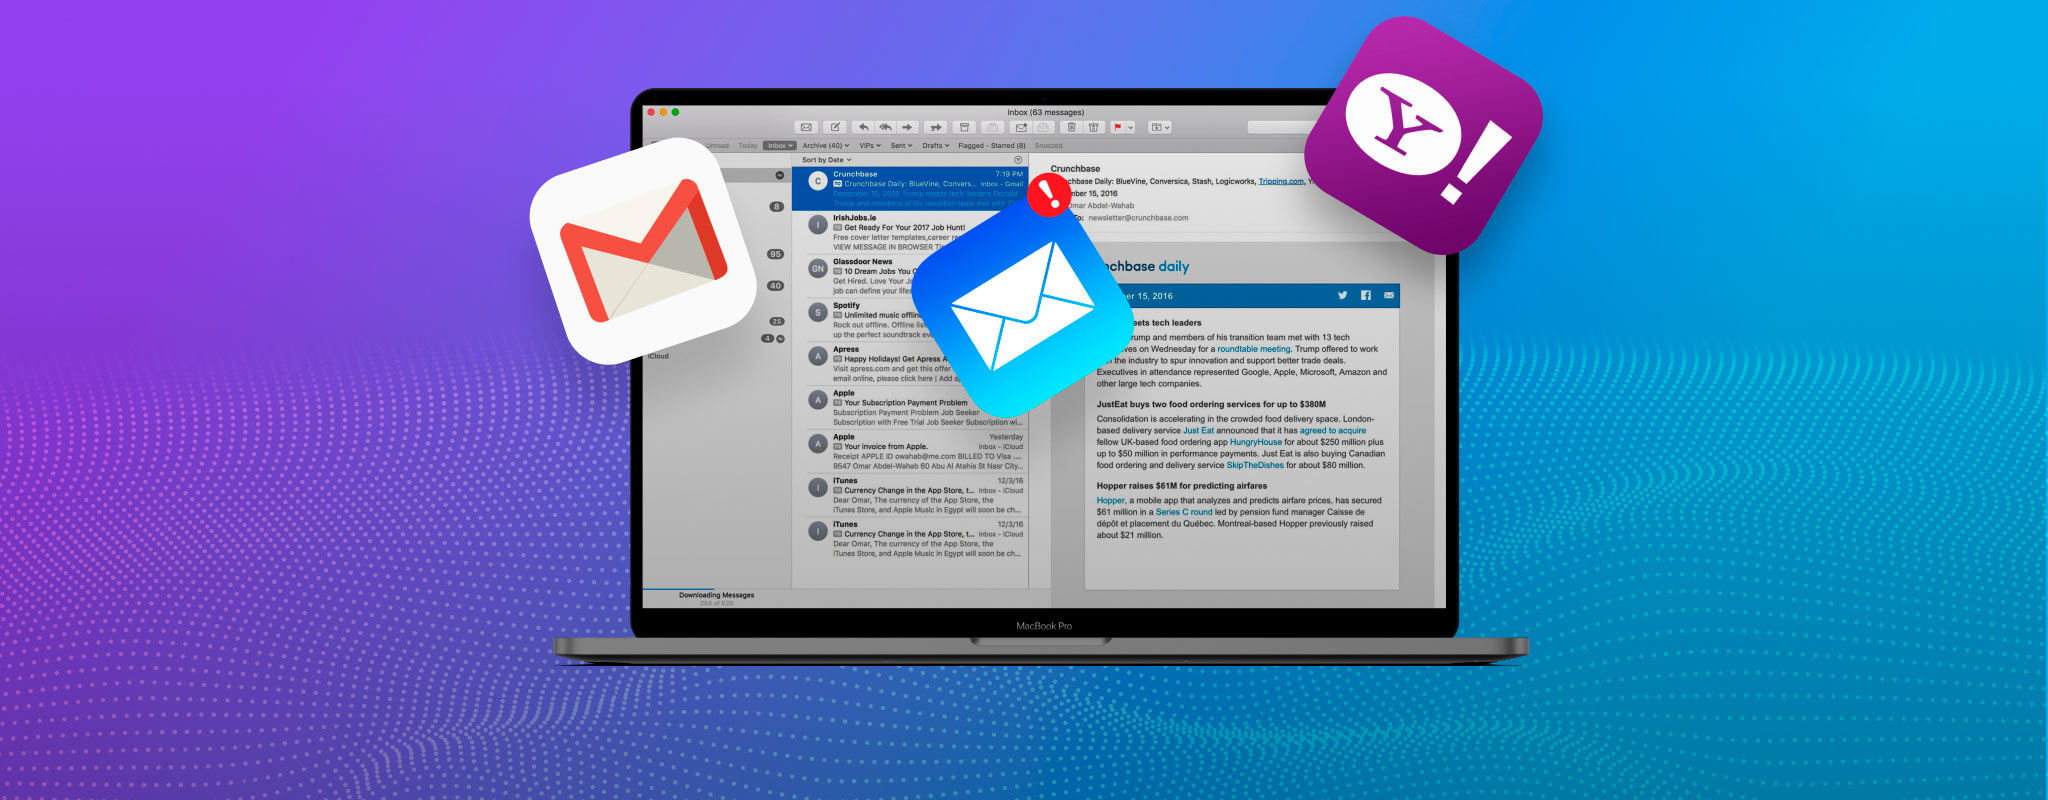 best email client for mac 2016